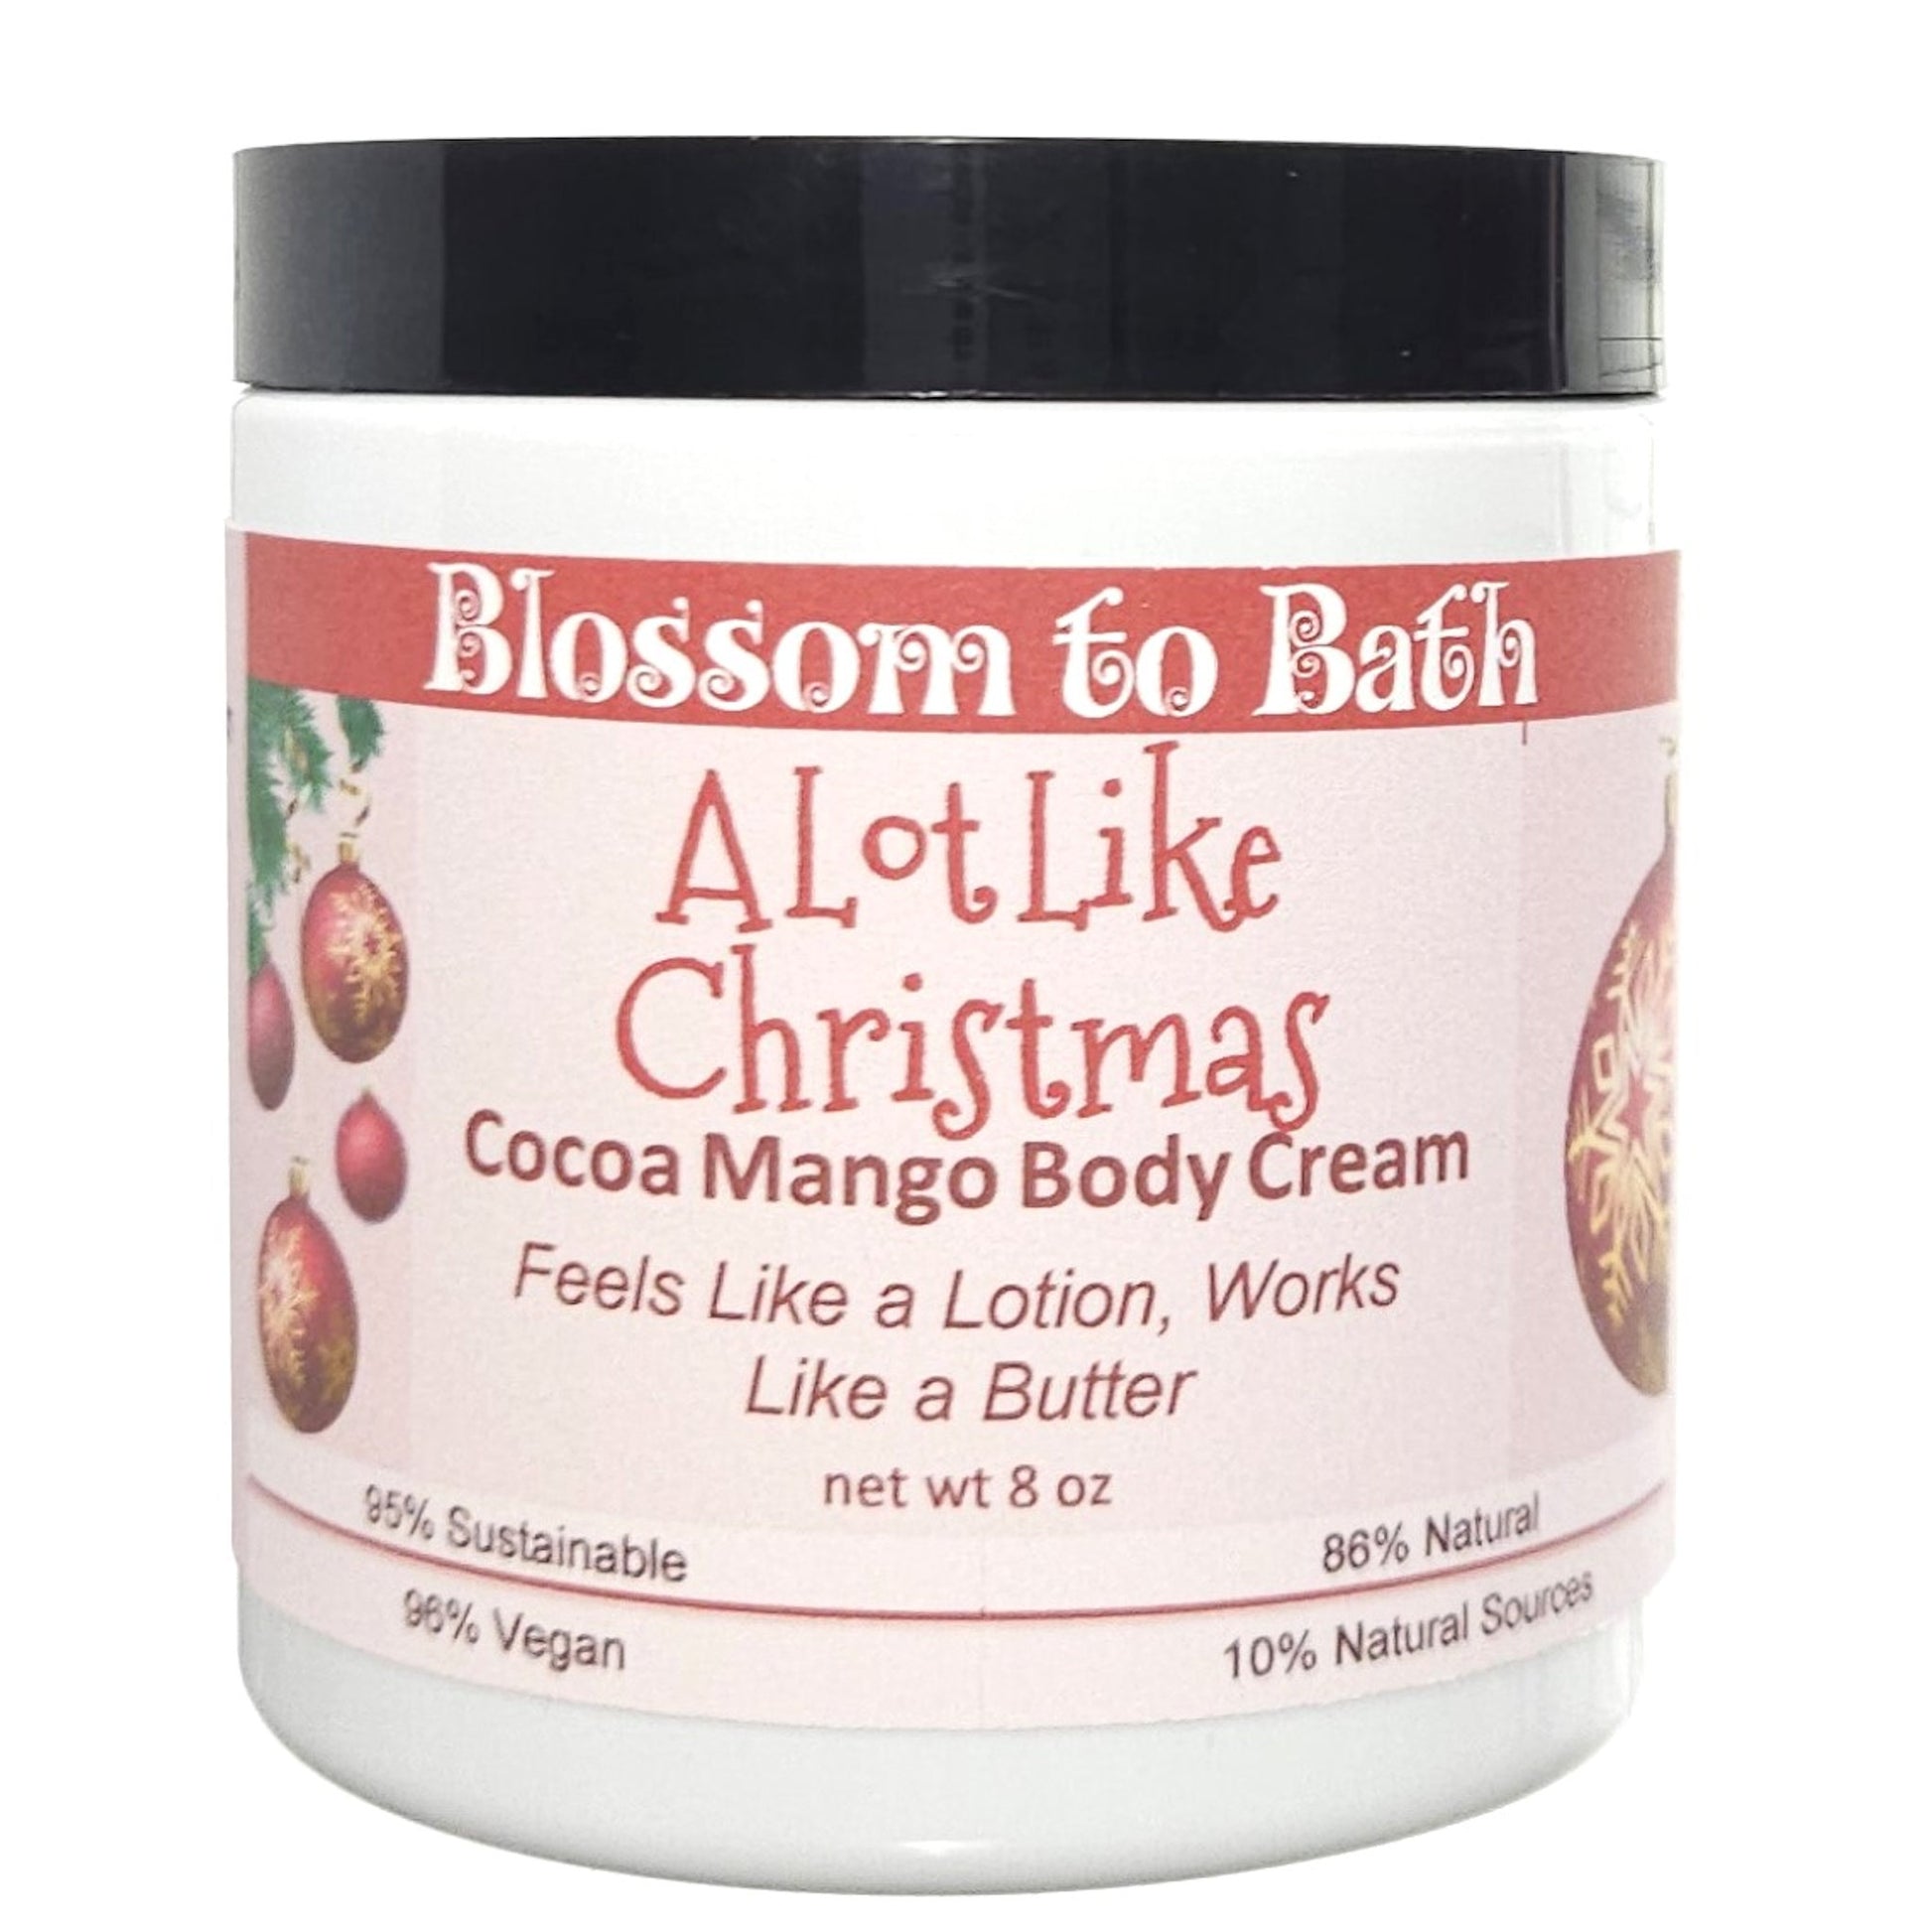 Buy Blossom to Bath A Lot Like Christmas Cocoa Mango Body Cream from Flowersong Soap Studio.  Rich organic butters  soften and moisturize even the roughest skin all day  Find the holiday mood in an instant with this spicy sweet fragrance.